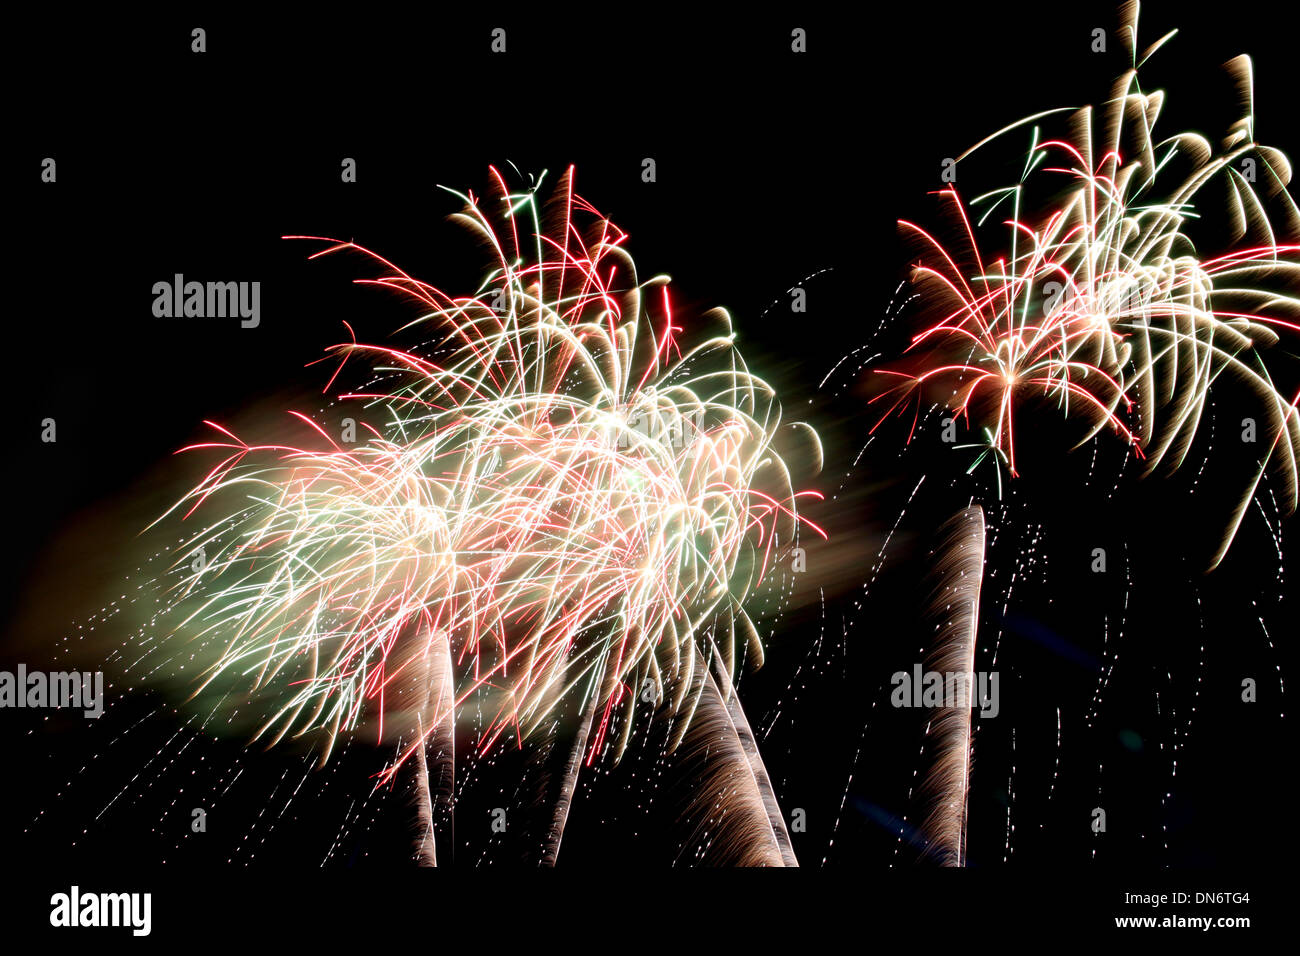 Variety of Colorful Fireworks or firecracker in the darkness. Stock Photo